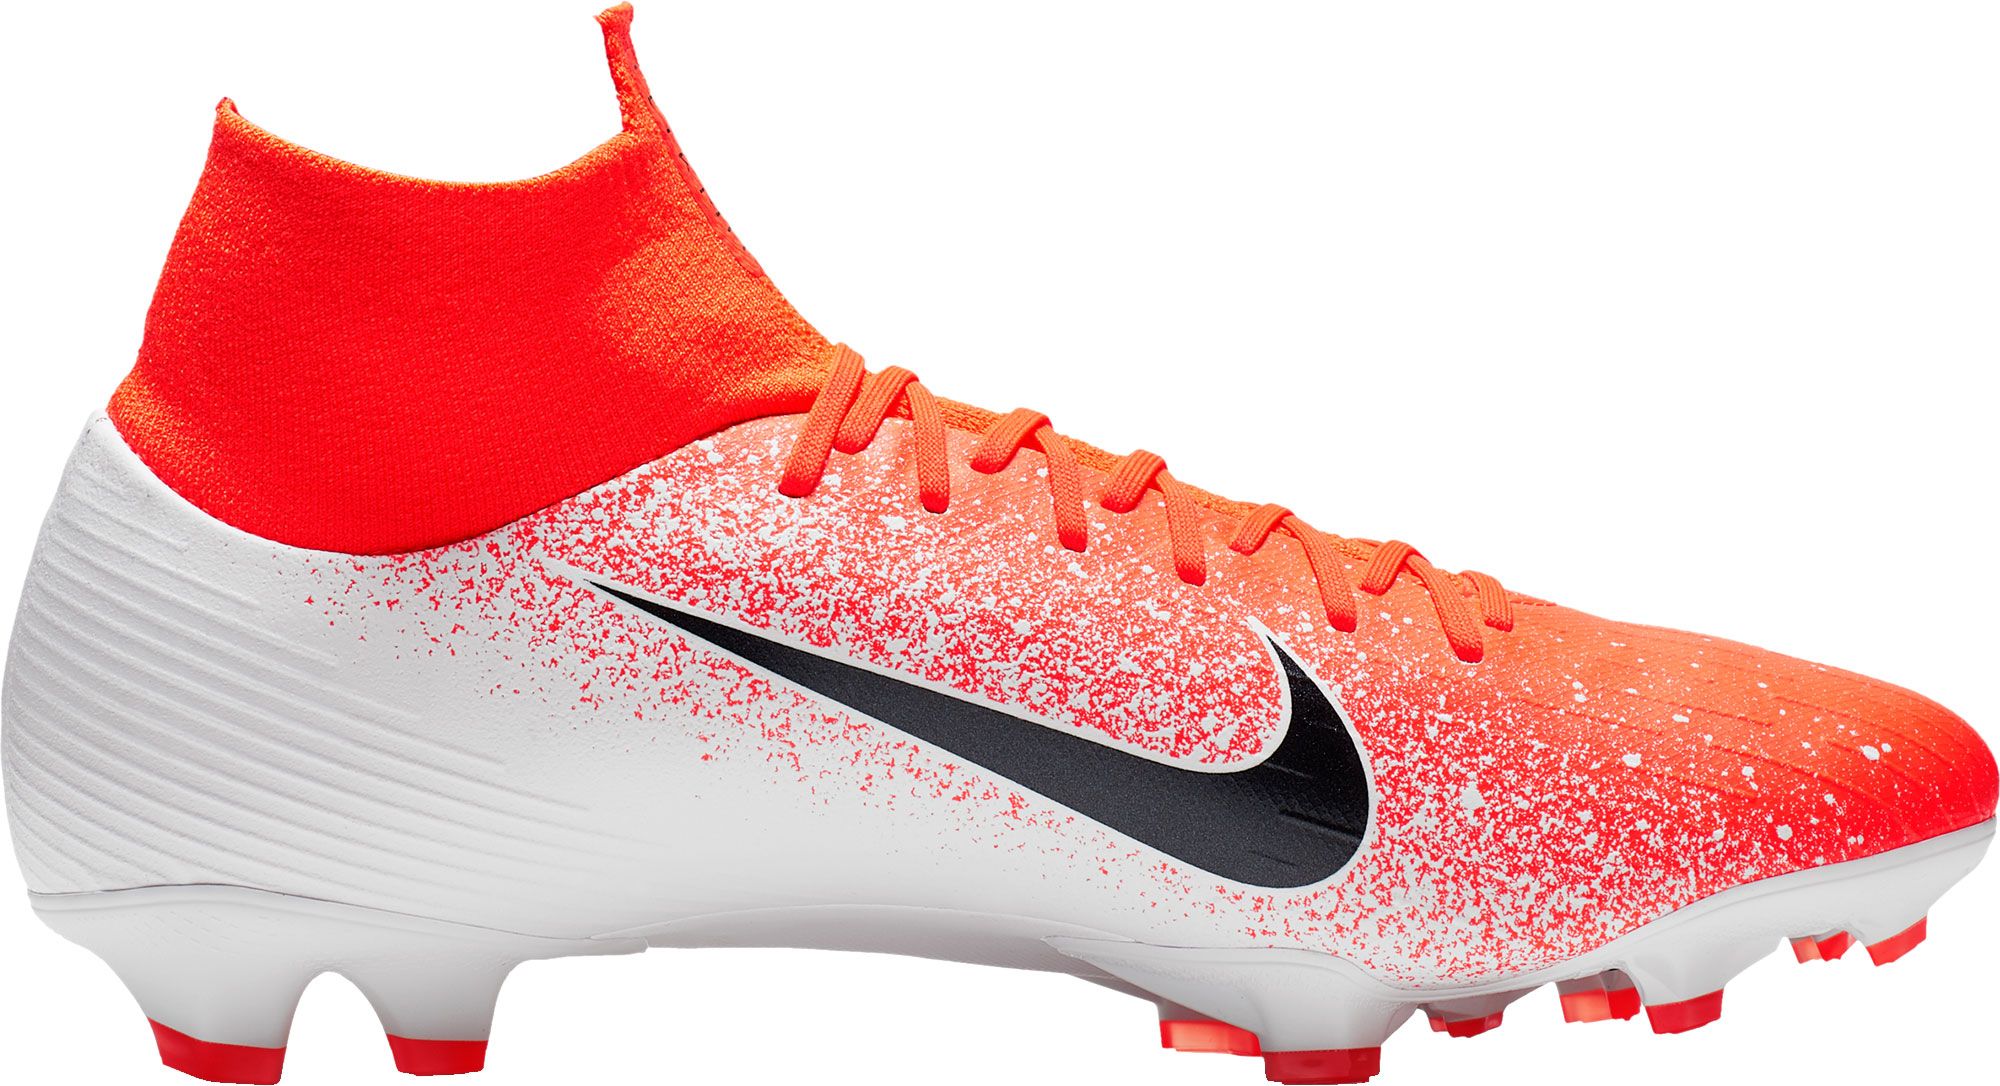 Nike Mercurial Superfly VI Elite Firm Ground Cleats Upper 90